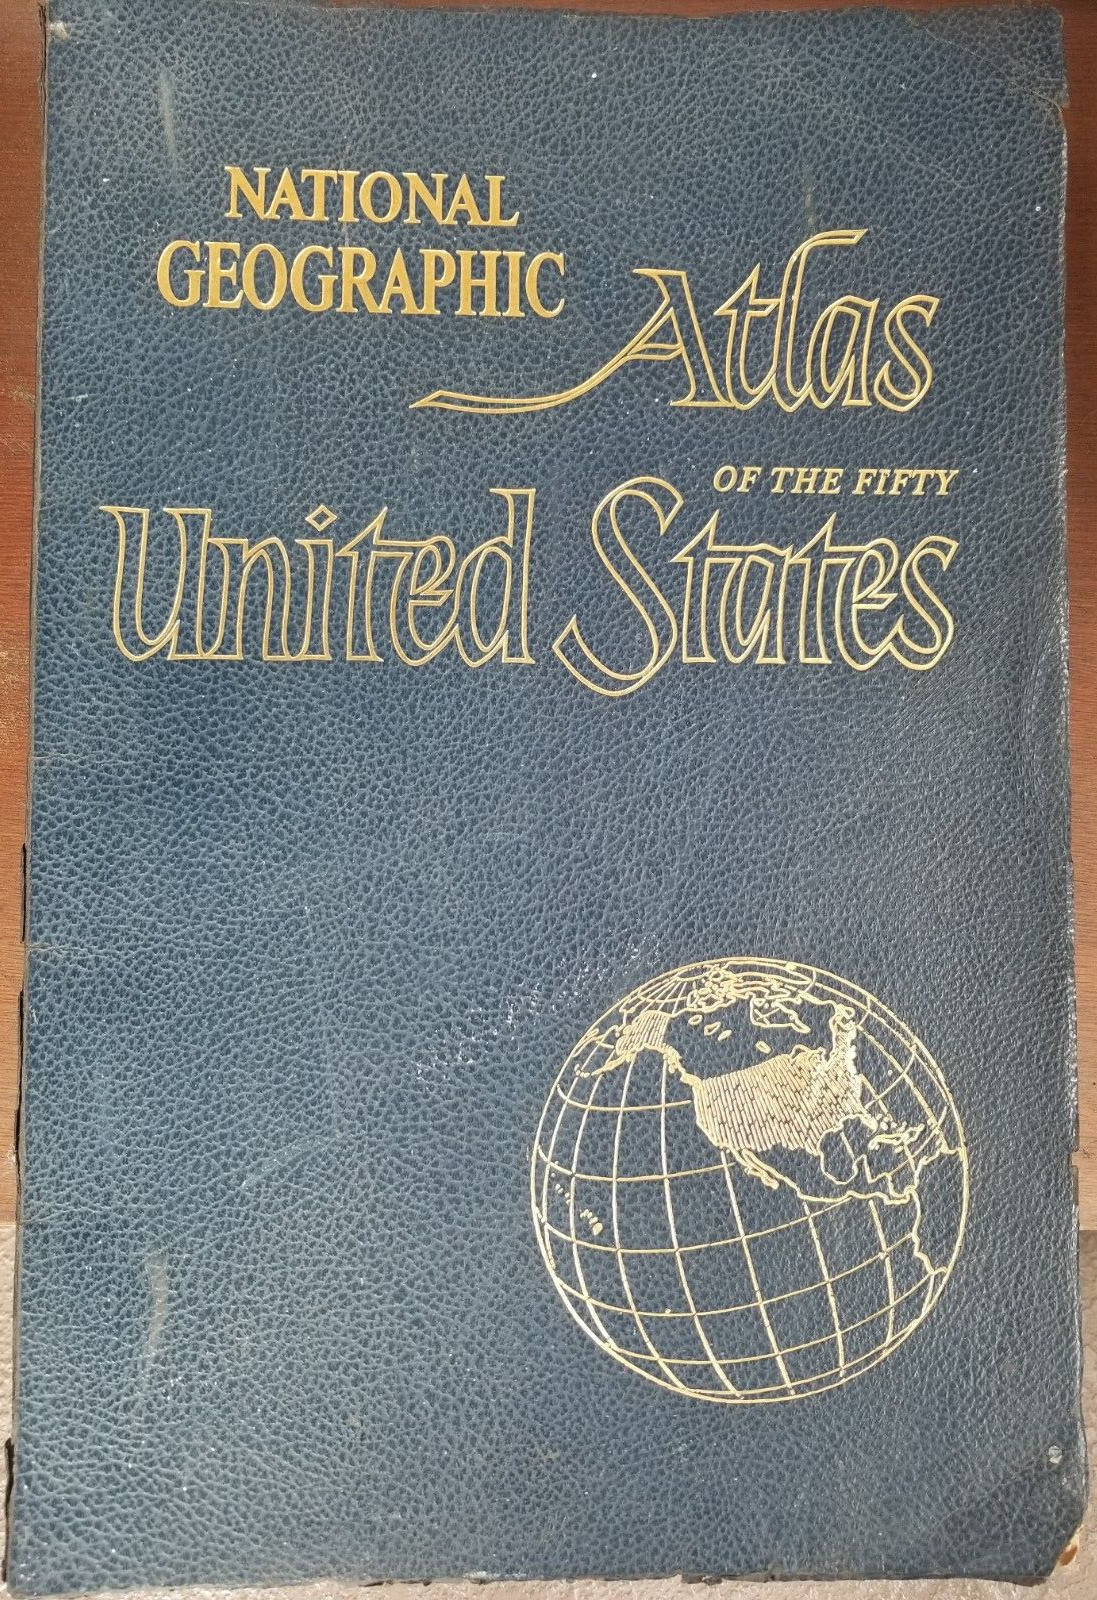 VTG Huge National Geographic Atlas of the Fifty United States 1960